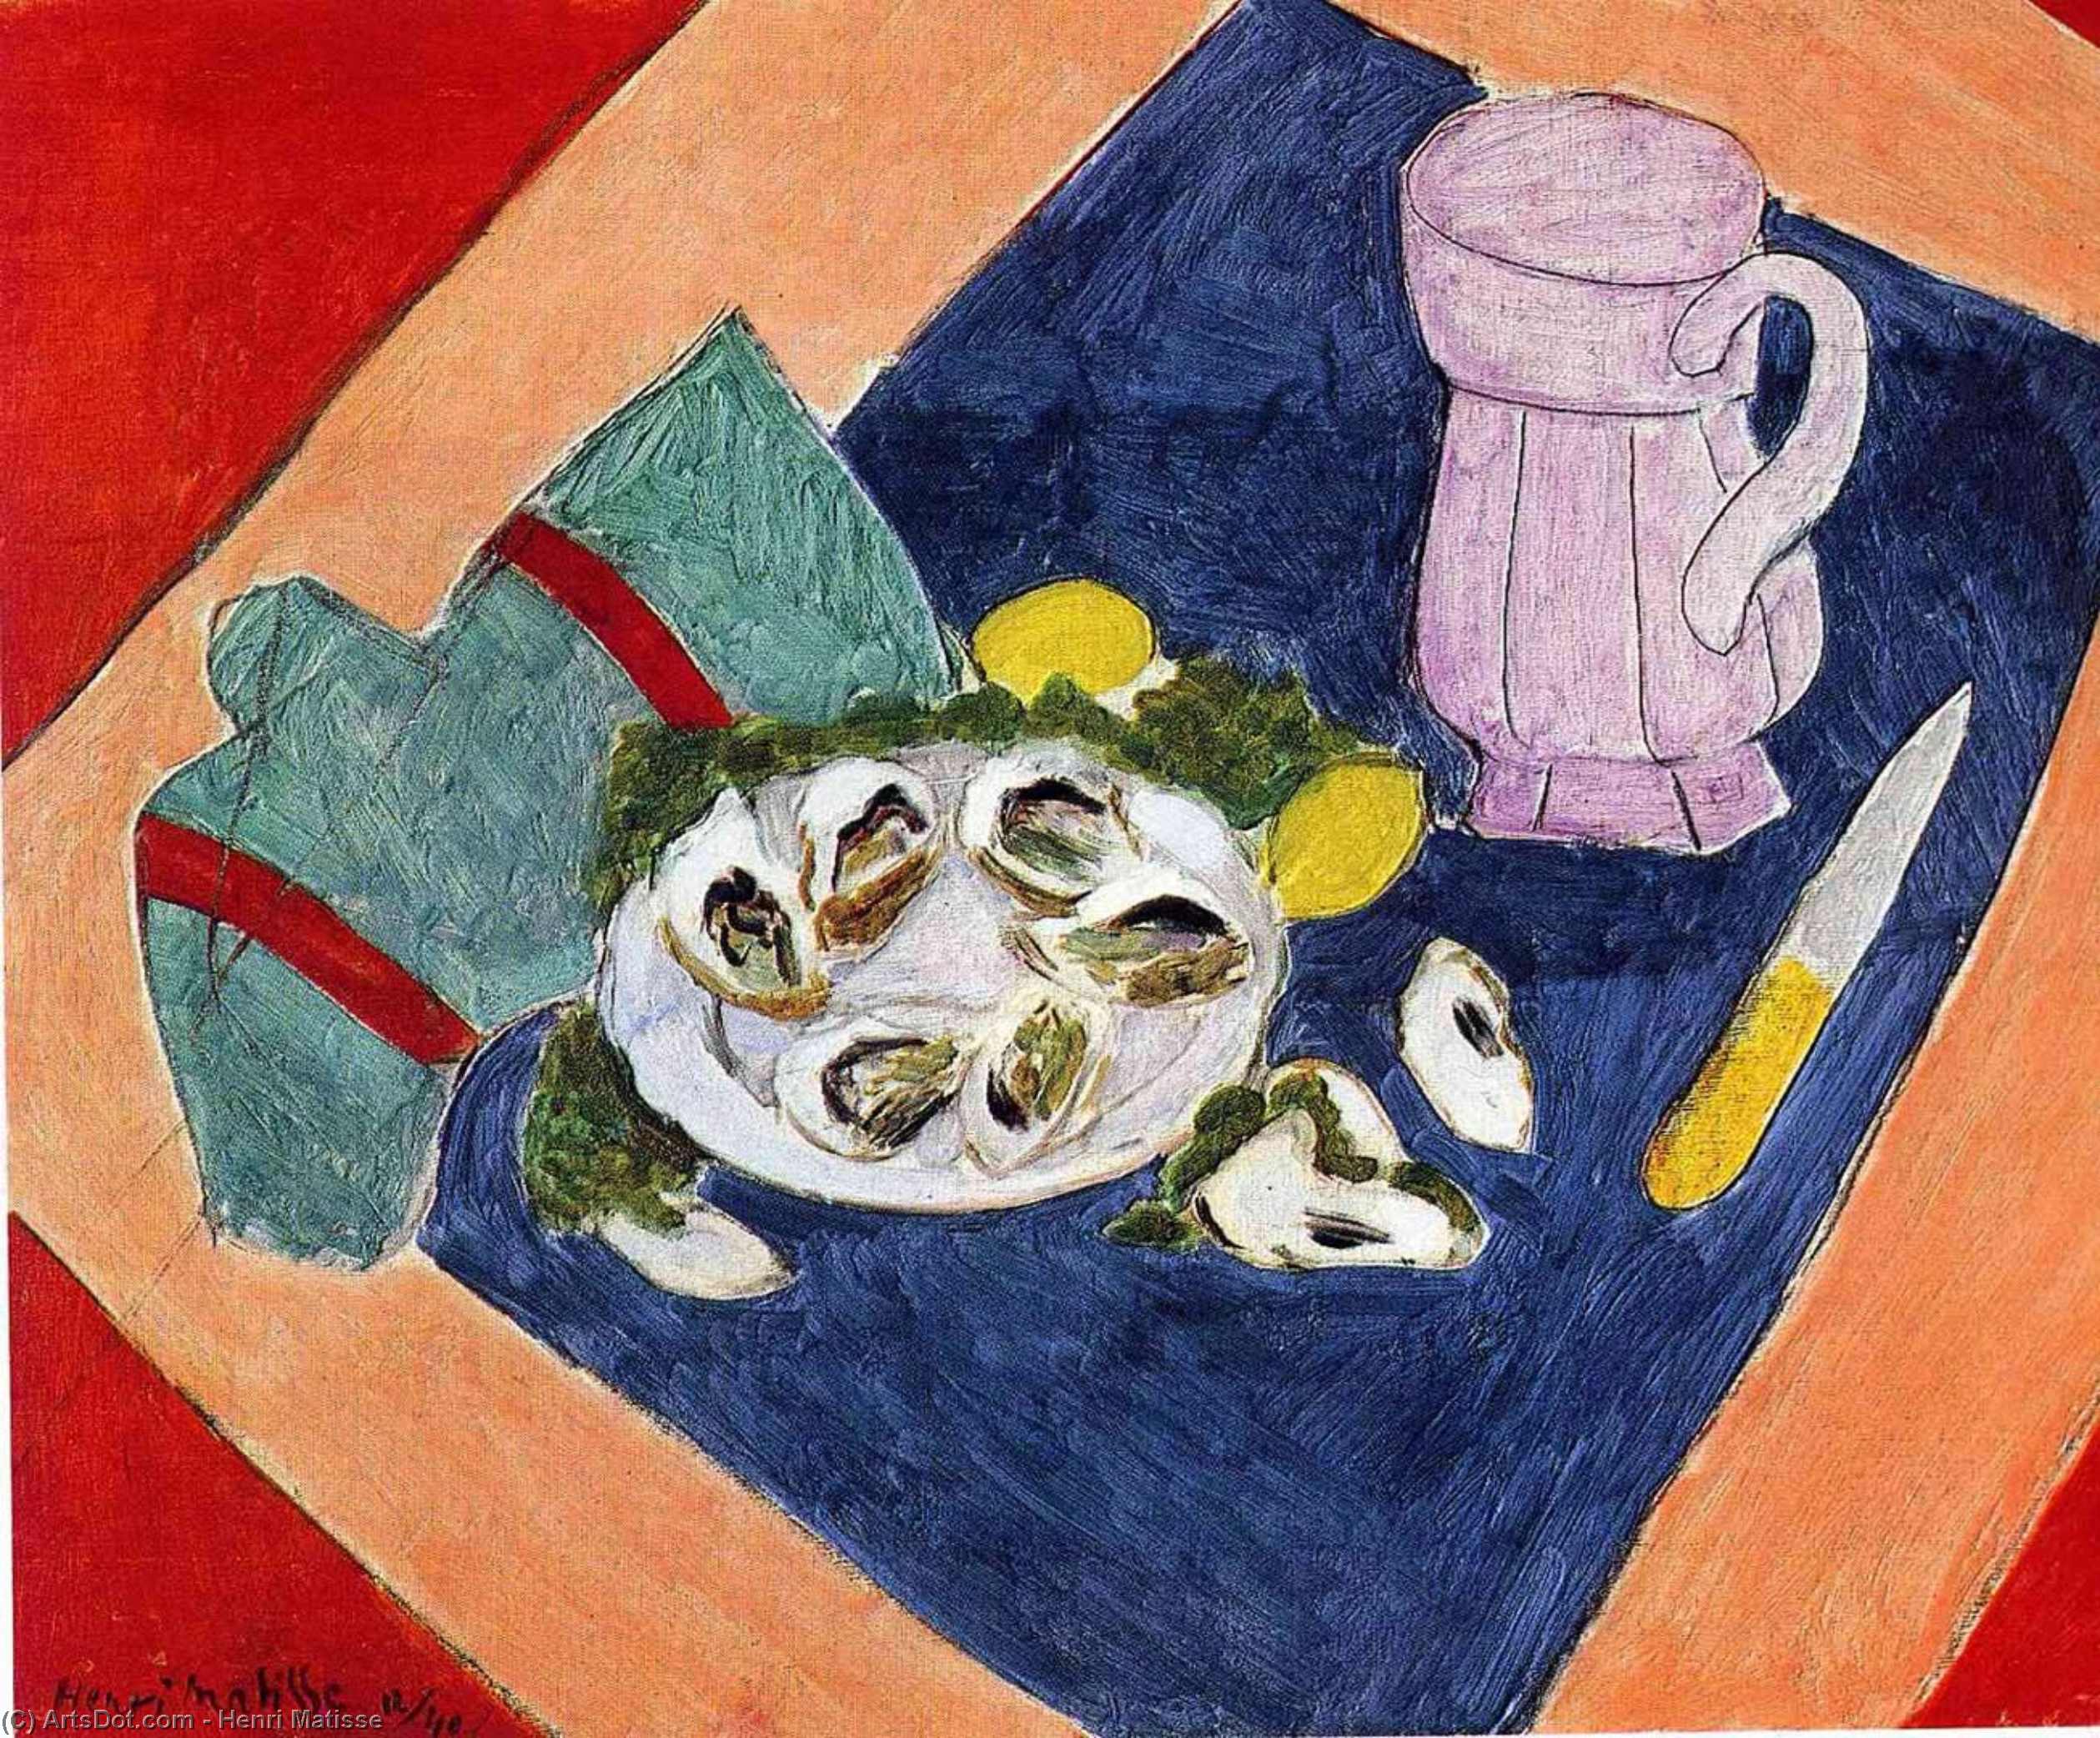 WikiOO.org - Encyclopedia of Fine Arts - Malba, Artwork Henri Matisse - Still Life with Oysters